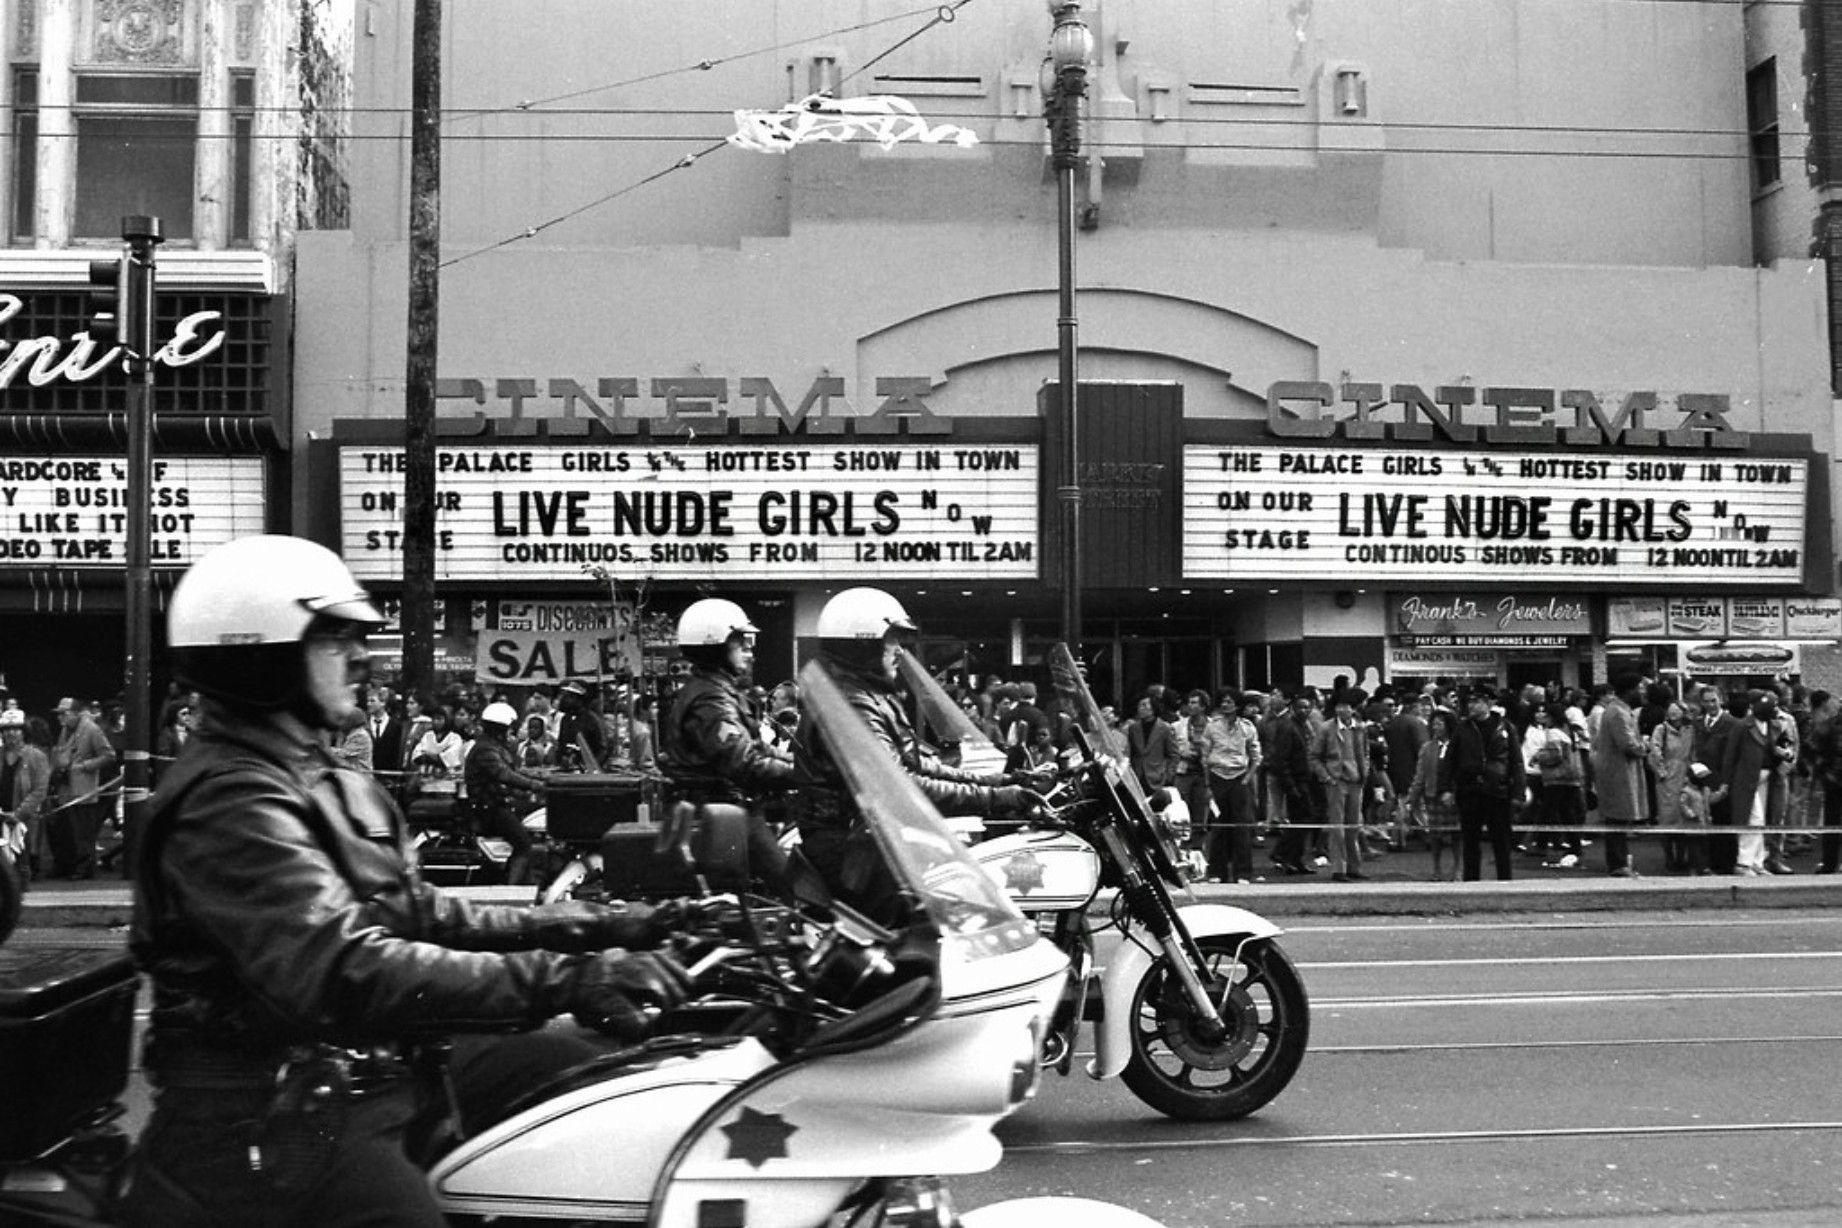 A line of motorcycle cops block off the entire street. Barricades hold back crowds on the sidewalk behind them. A cinema promises LIVE NUDE GIRLS from its marquee.